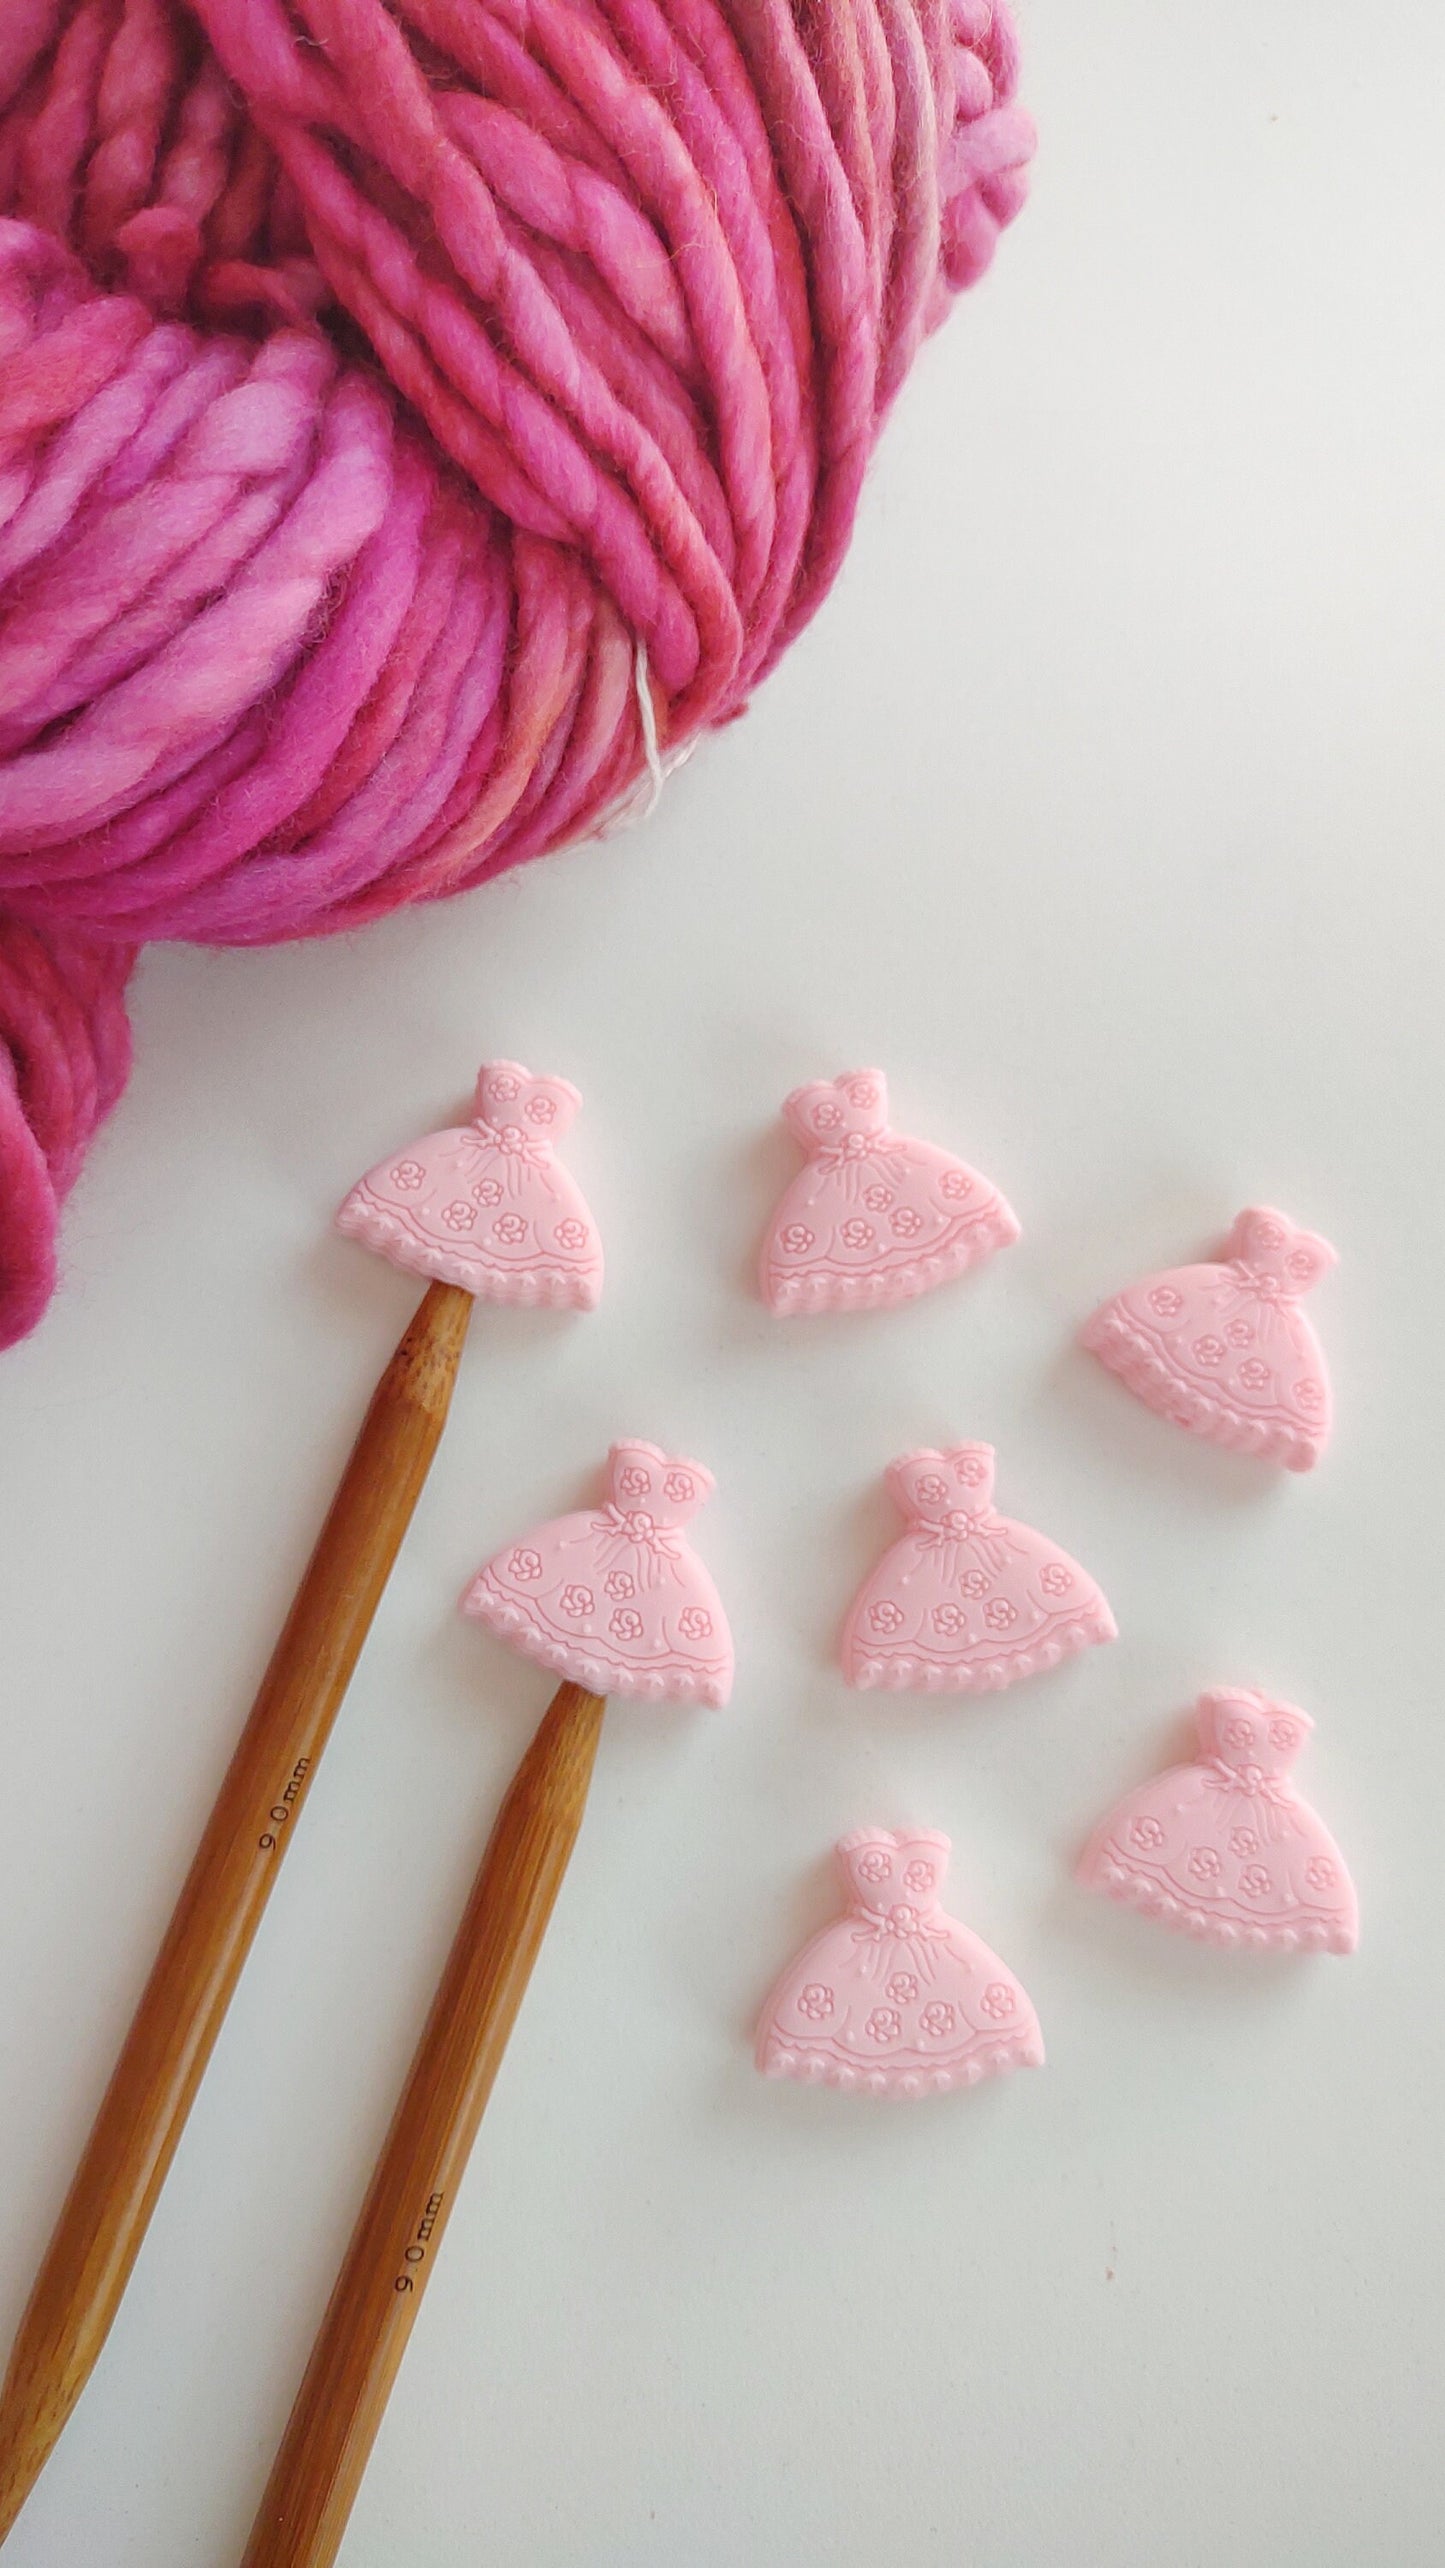 Light Pink Fancy Dress Knitting Needle Stitch Stoppers. Needle Protectors. Knitting Notions, Accessories, Supplies, Tools. Valentine's Day